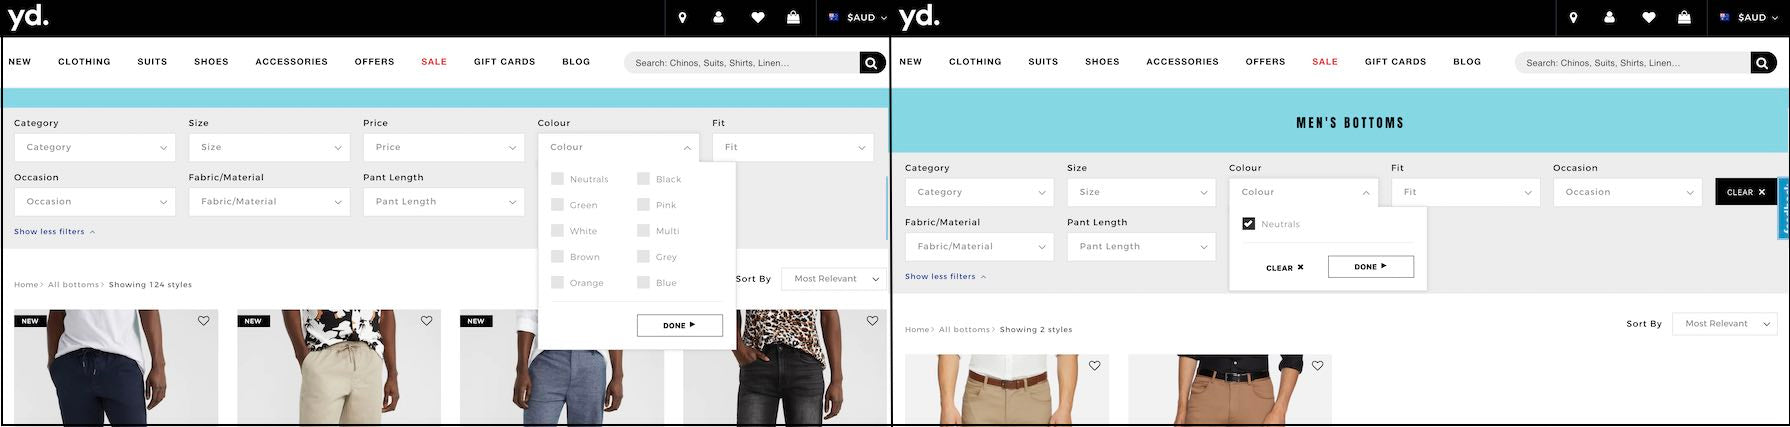 inefficient product filters on ecommerce website